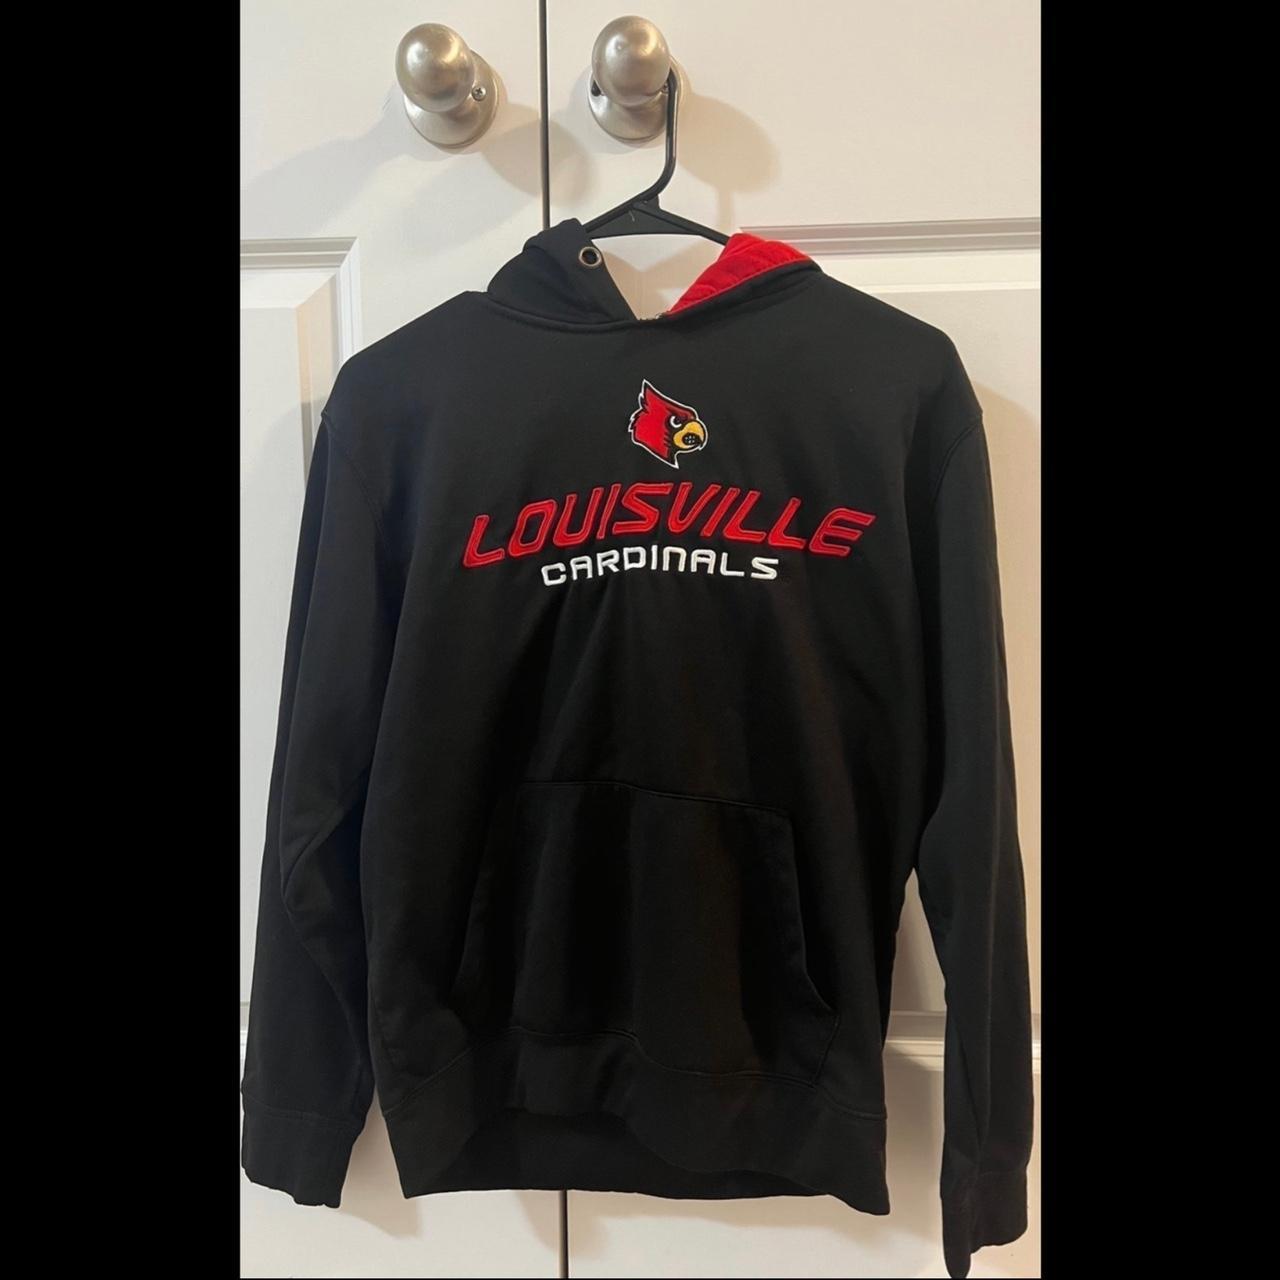 louisville hoodie, size medium, a tiny stain on the - Depop